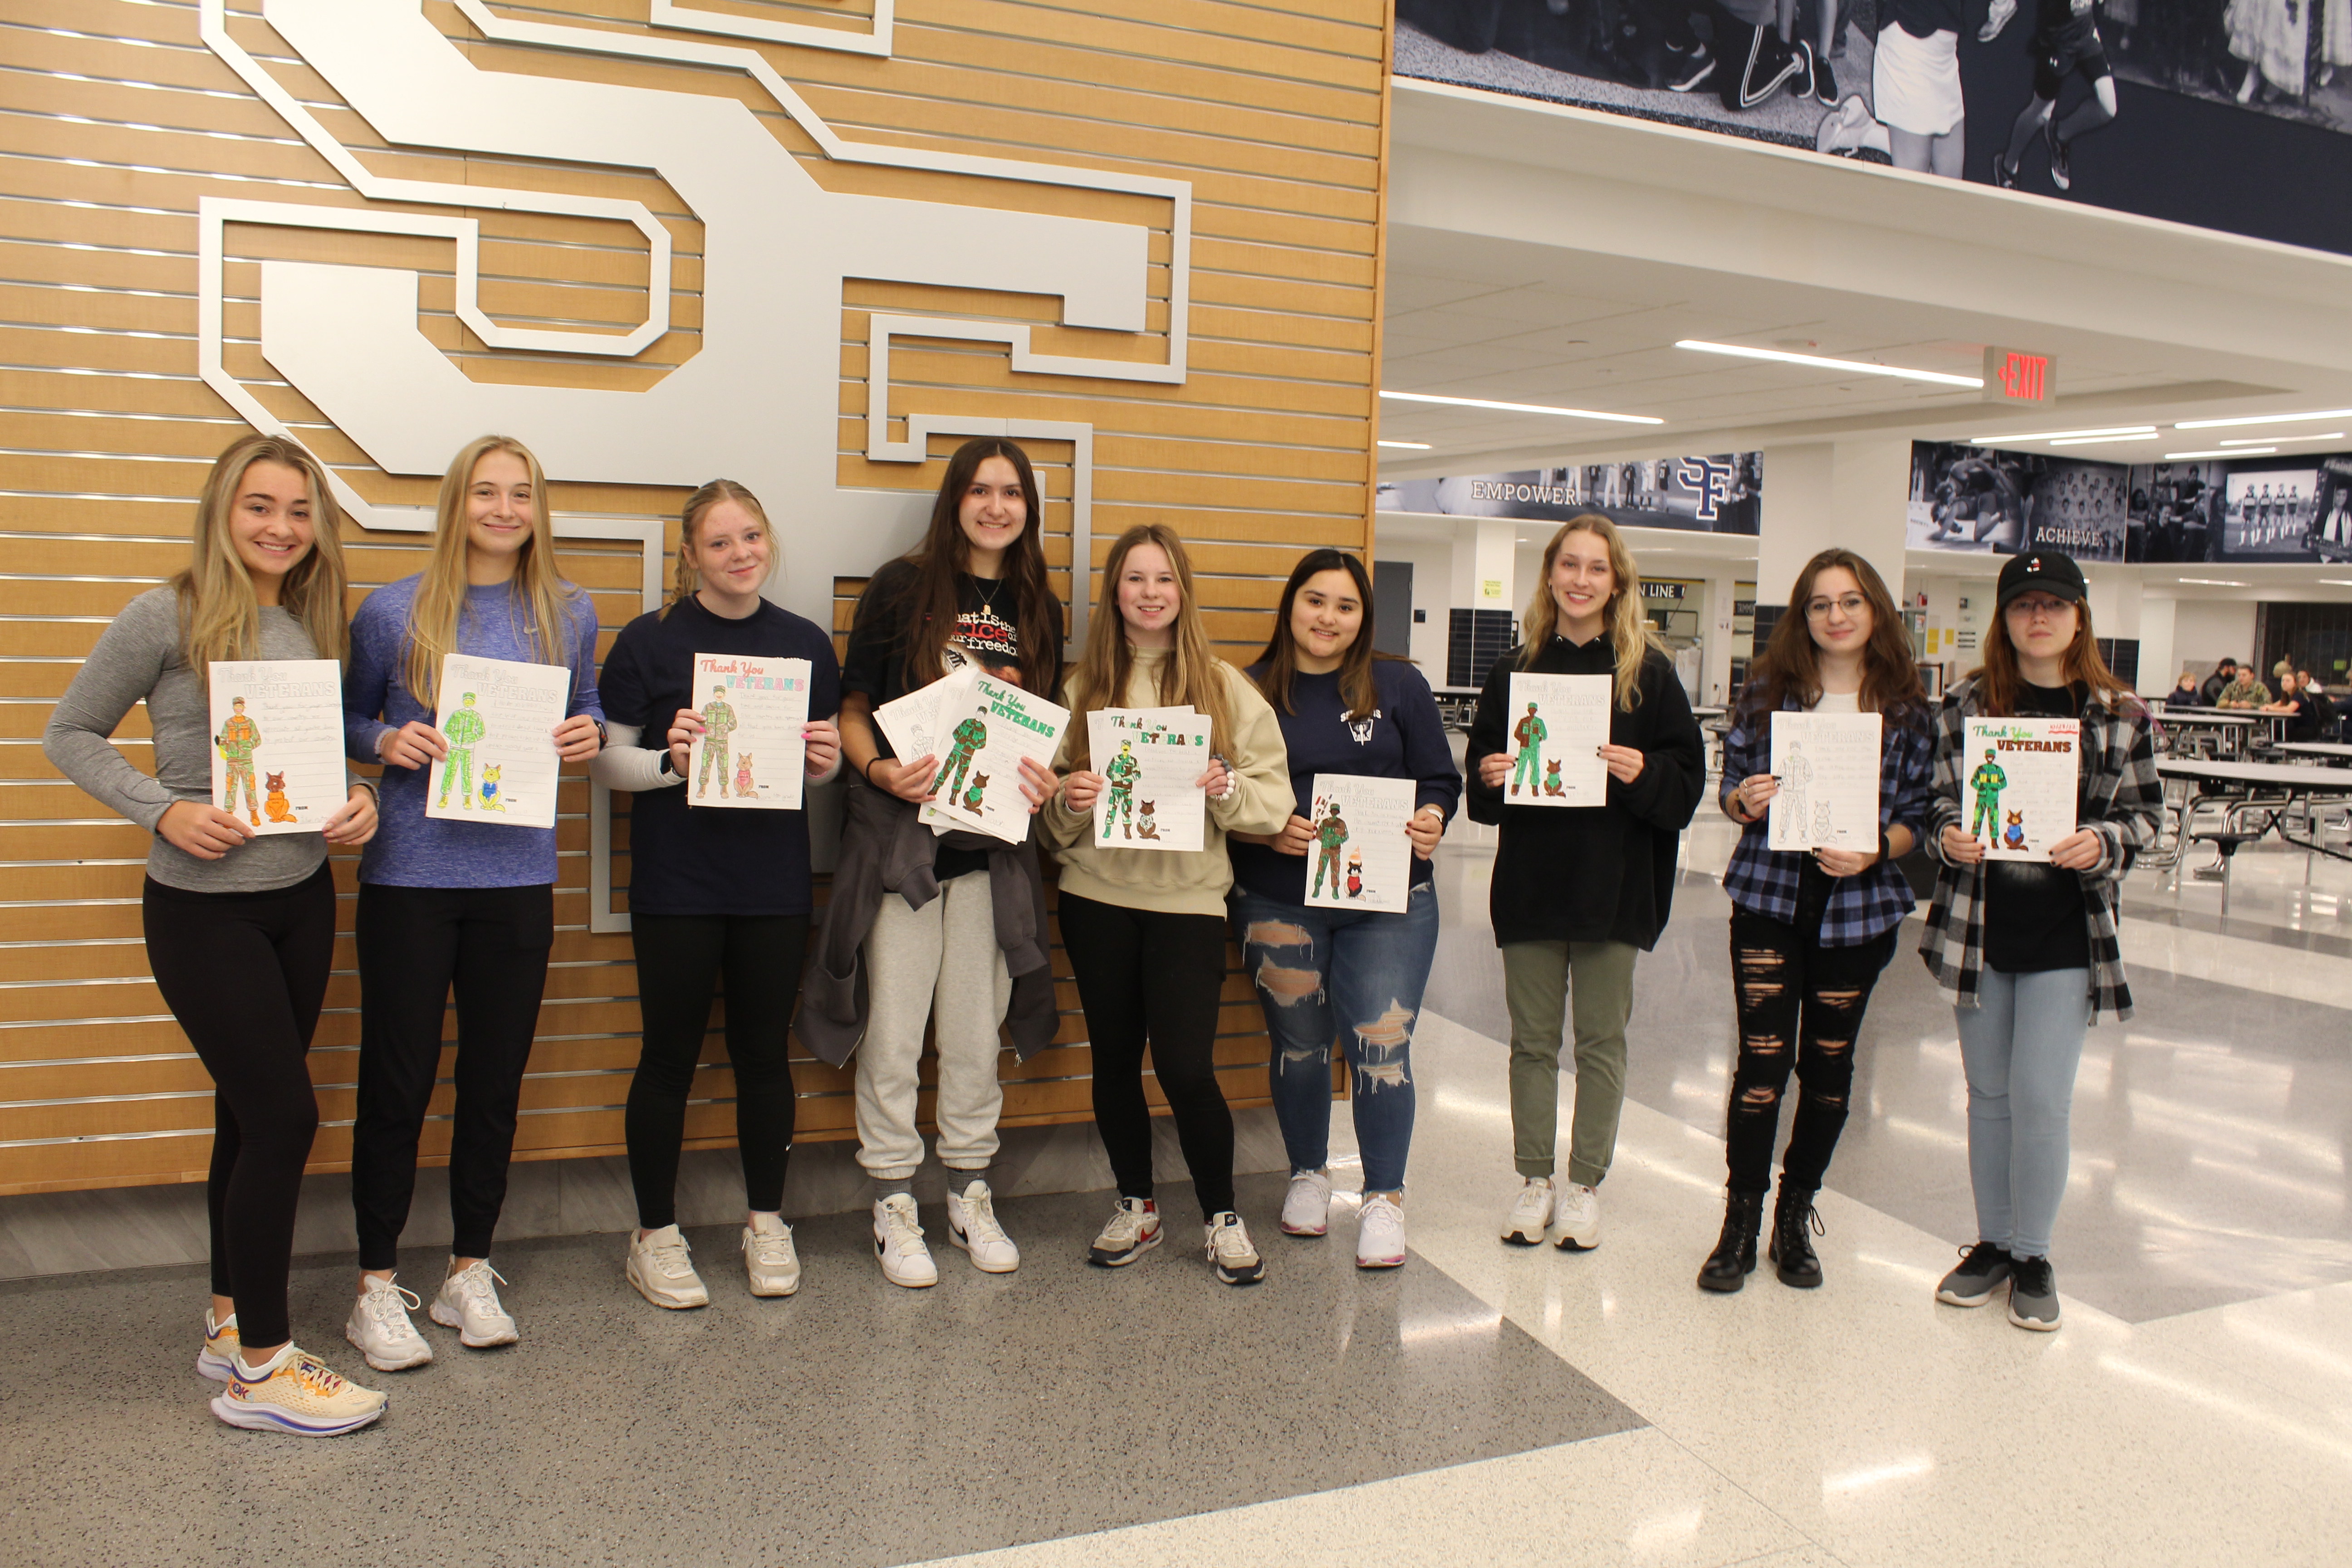 Image NHS Students with letters to veterans